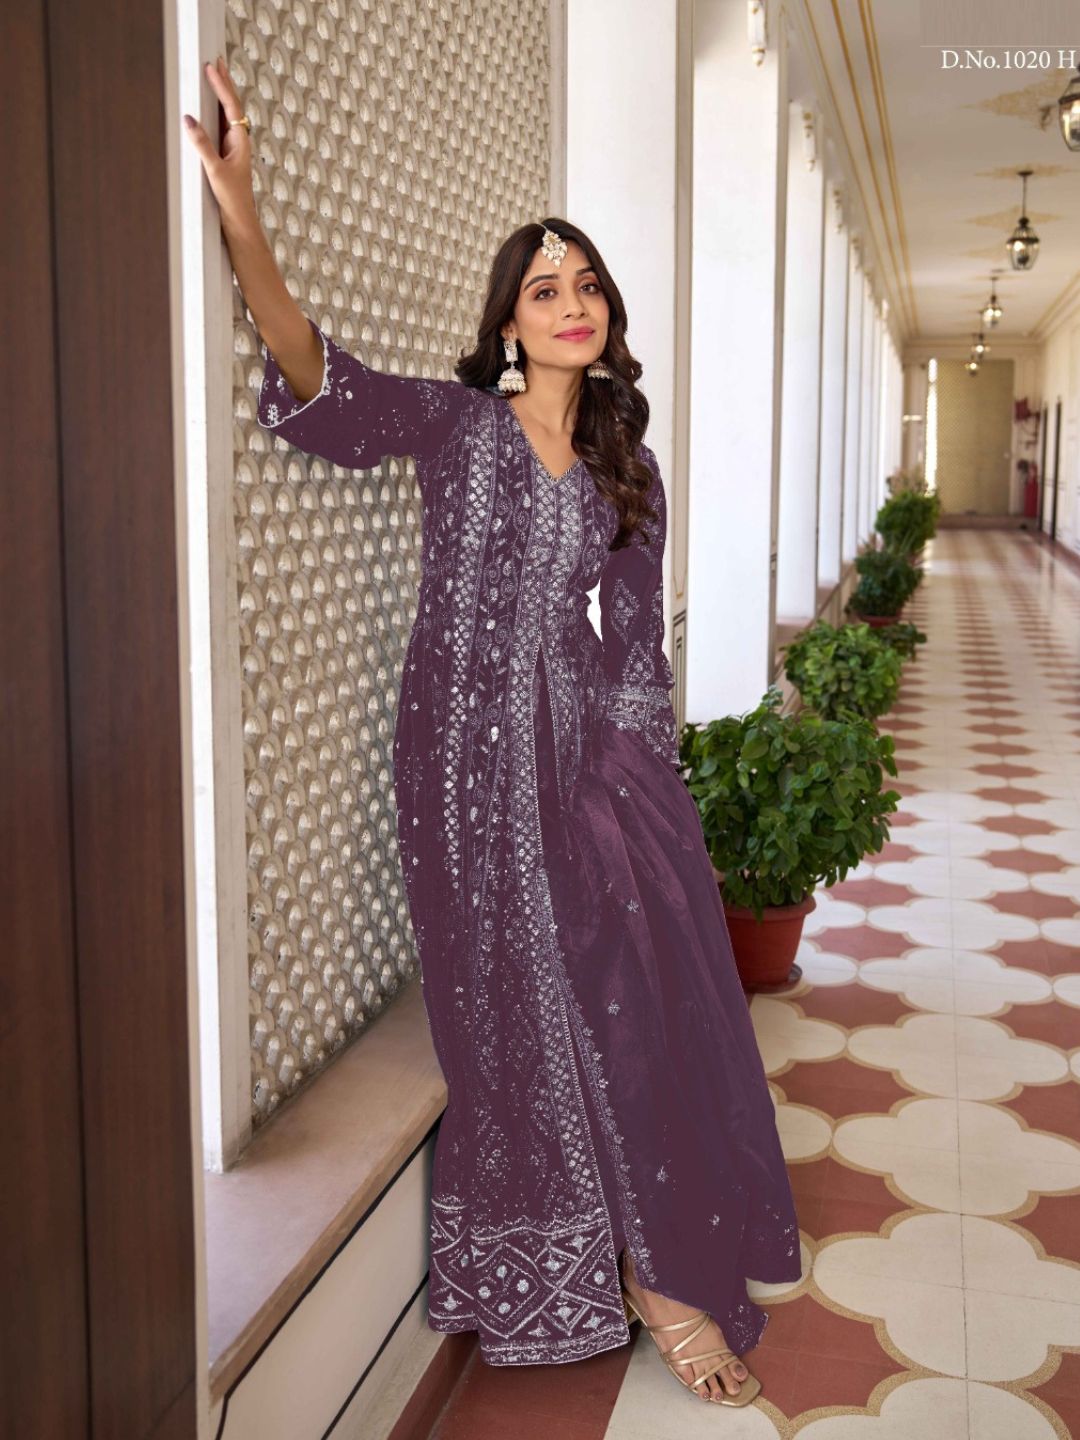 Georgette Embroidered Bollywood Salwar Kameez in Purple with Stone work-81986